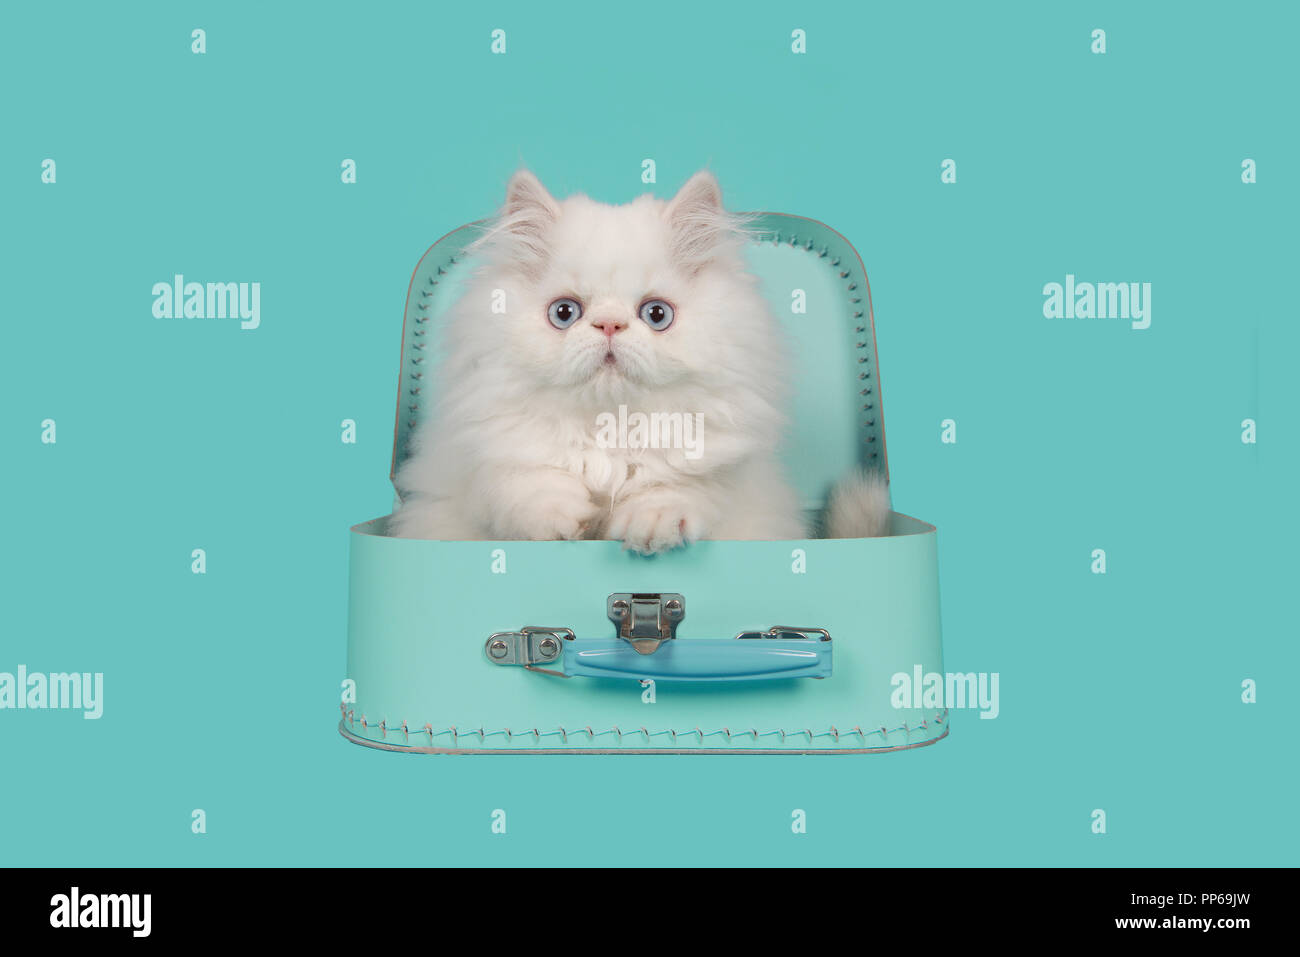 White persian longhair kitten with blue eyes in a turquoise blue suitcase on a turquoise blue background Stock Photo